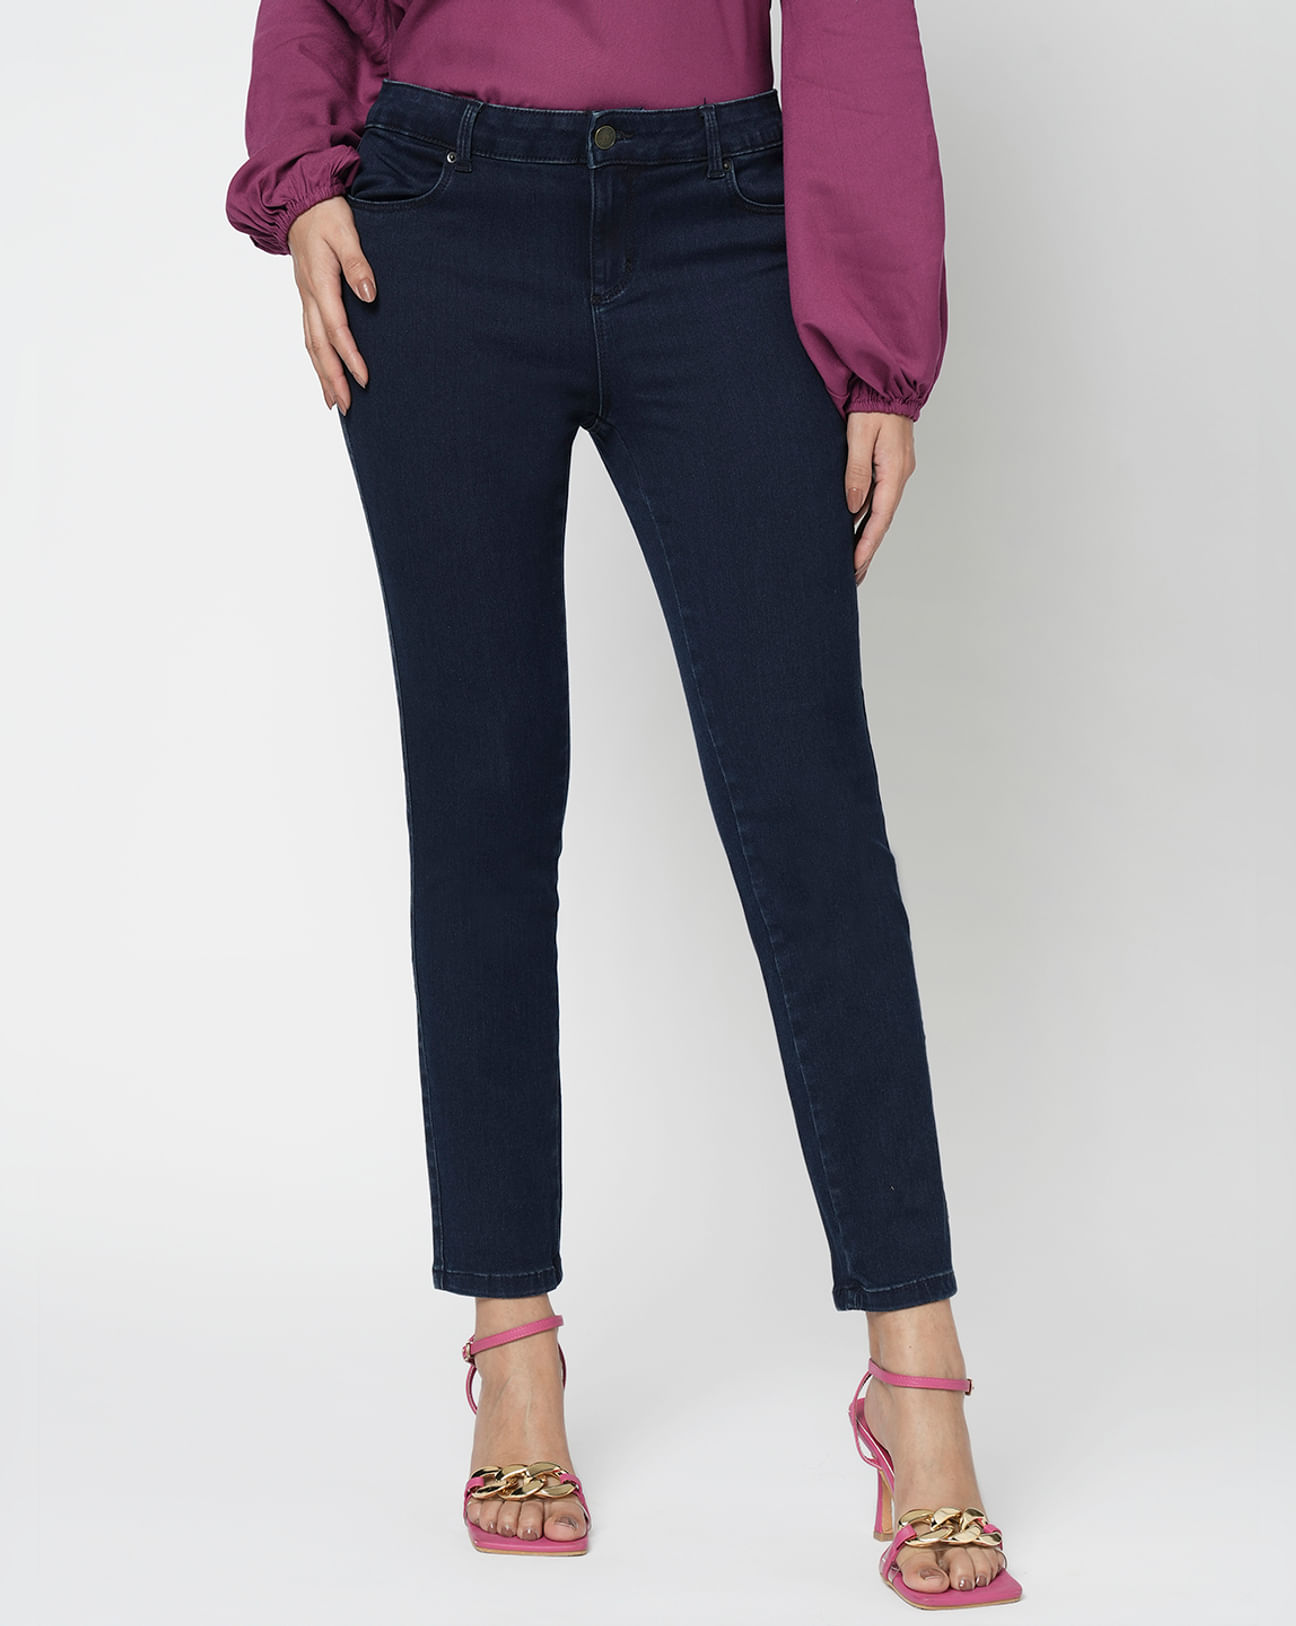 Purple Skinny Mid-Rise Ankle Length Jeans